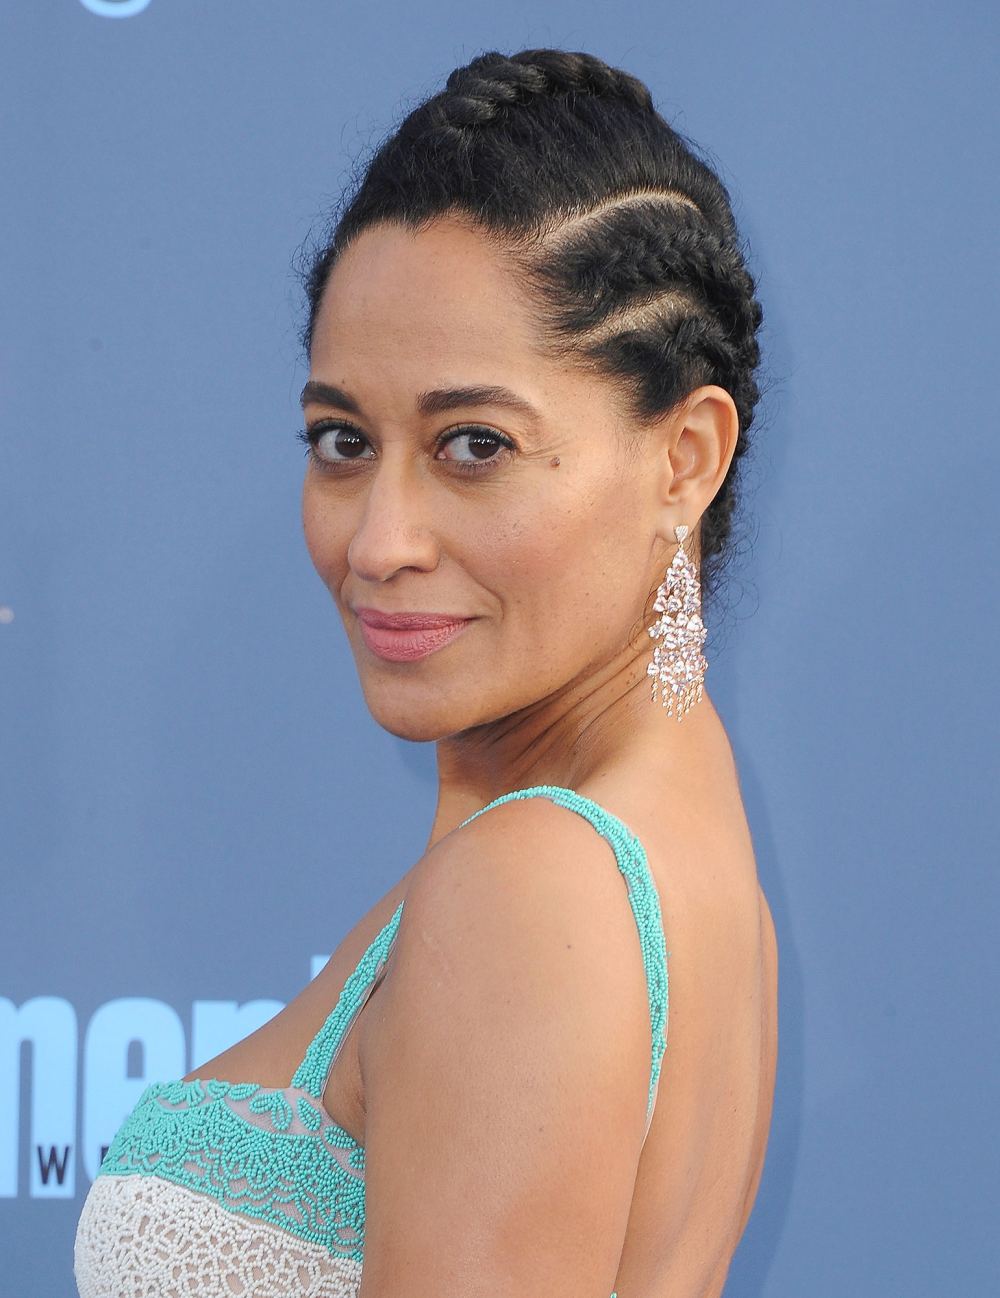 Tracee Ellis Ross Beauty Of The Day